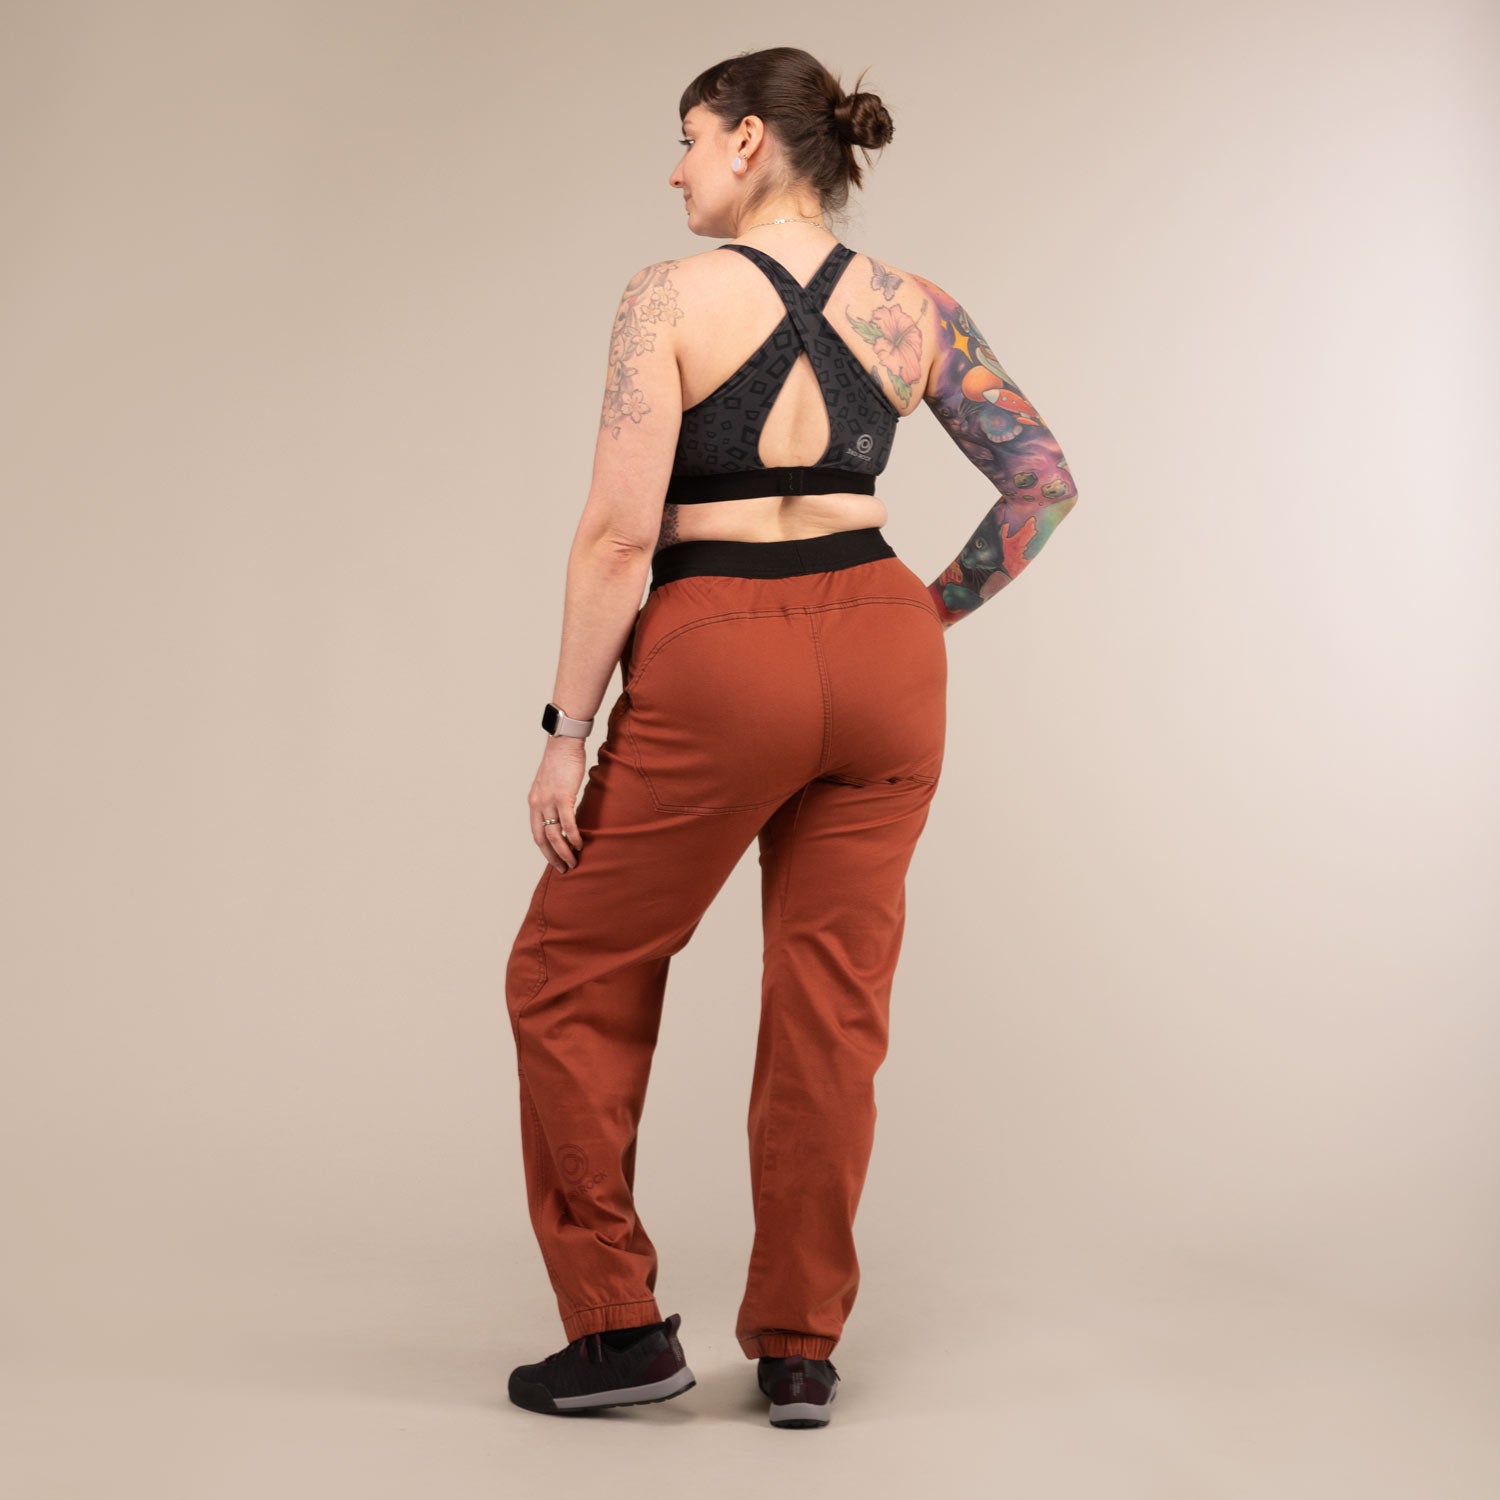 SUPERNOVA TROUSERS | Climbing Organic Stretch Trousers | 3RD ROCK Clothing -  Laura is 5ft 6 with a 31" waist, 43" hips and wears a size 32/RL. F